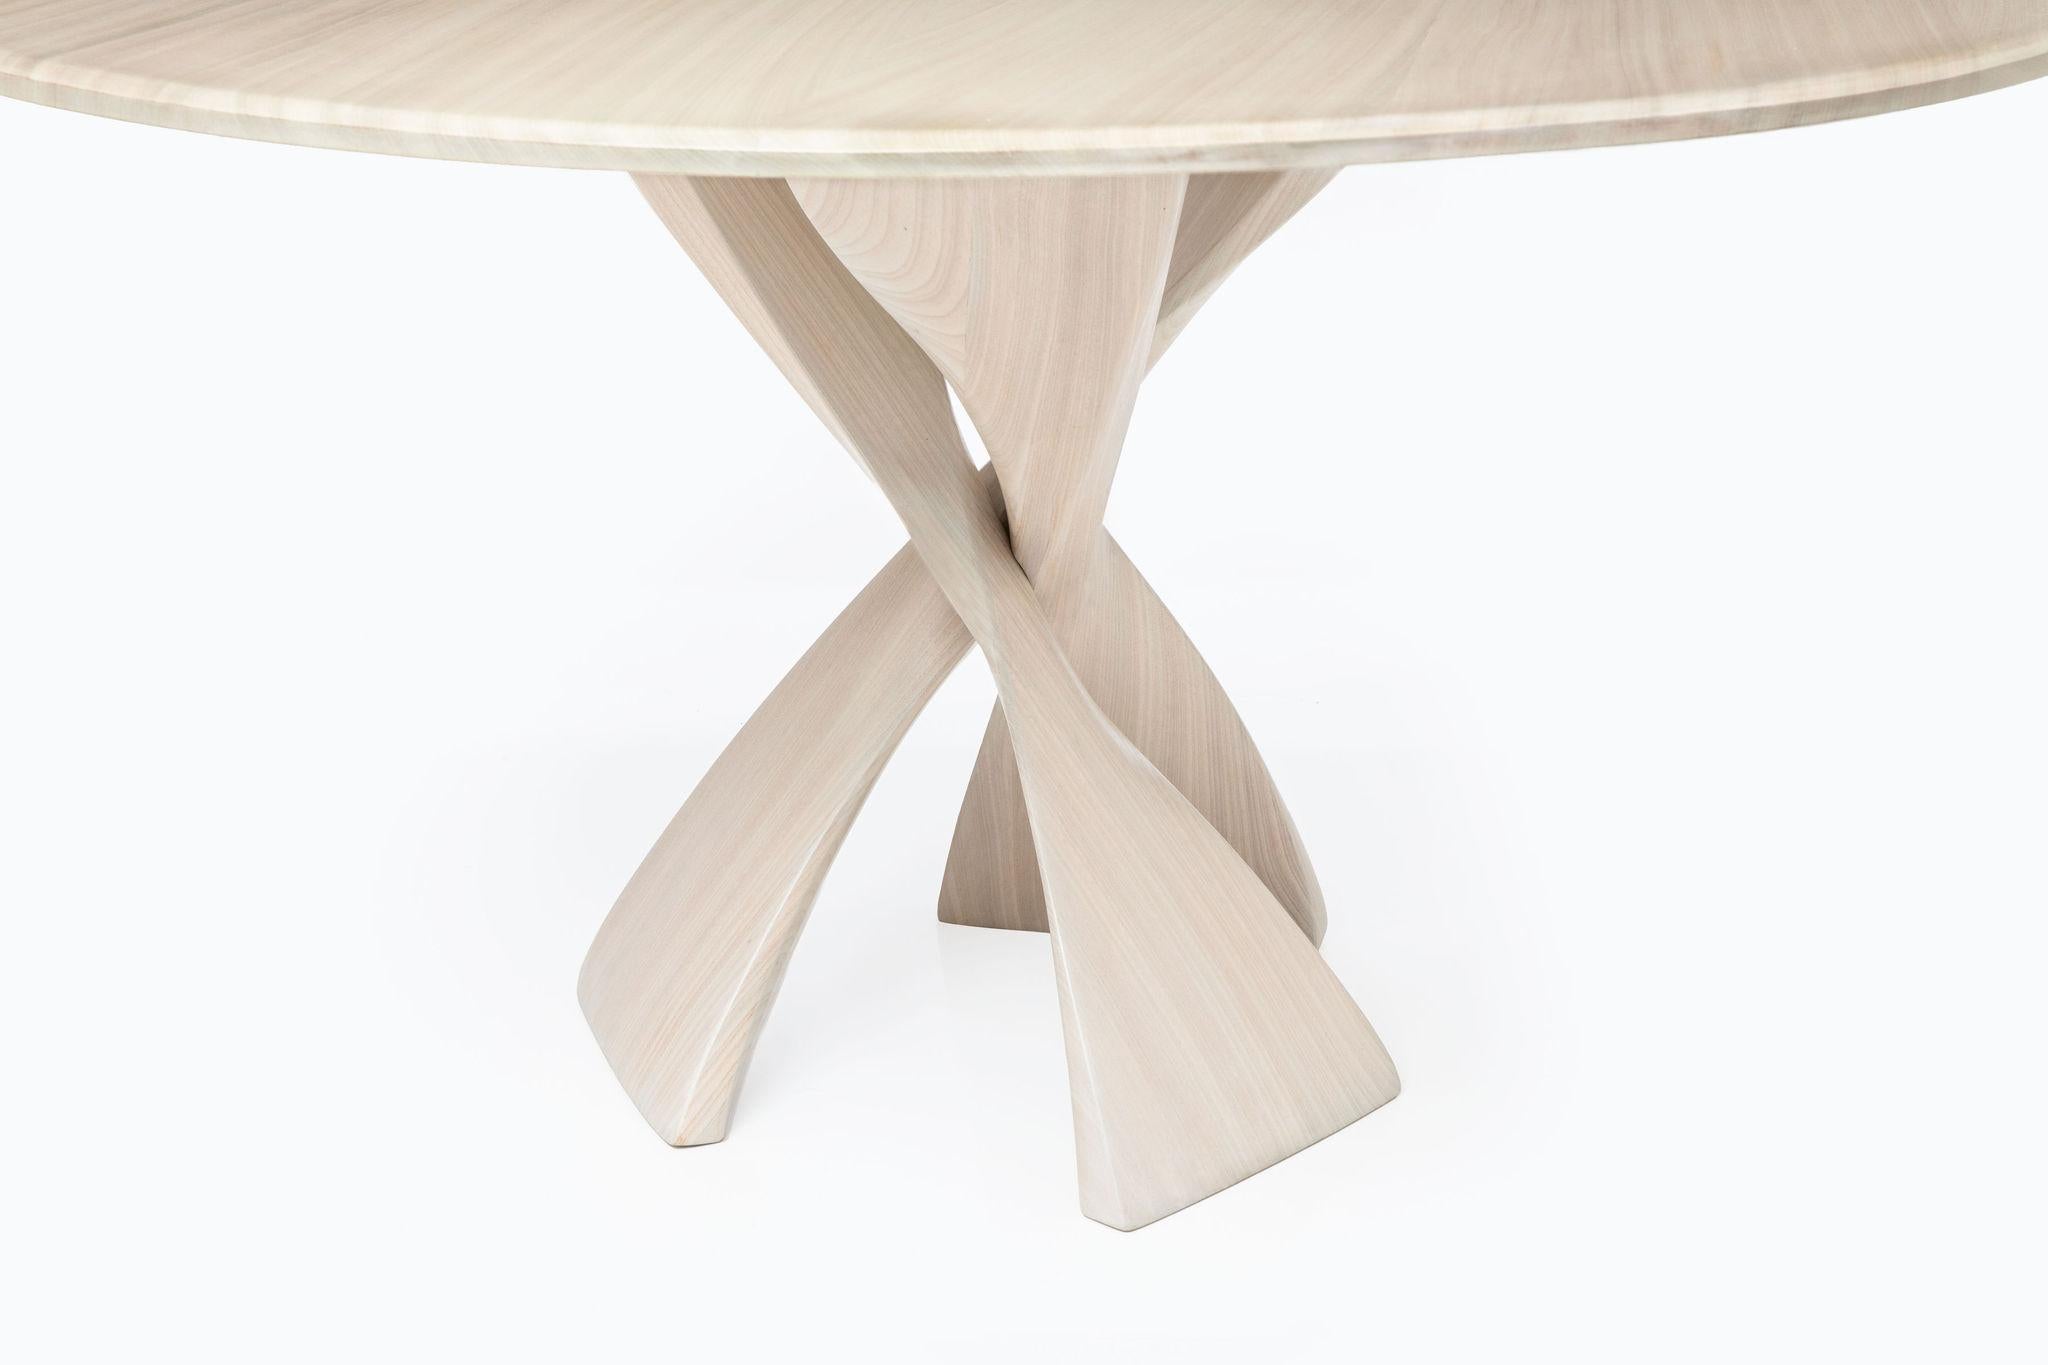 The AvA pedestal table is made up of three identical elements that twist around each other in a repeat pattern. The inspiration for the legs is reminiscent of The Evolution Stool design, also conceived and engineered by Vlad Krasnogorov. An